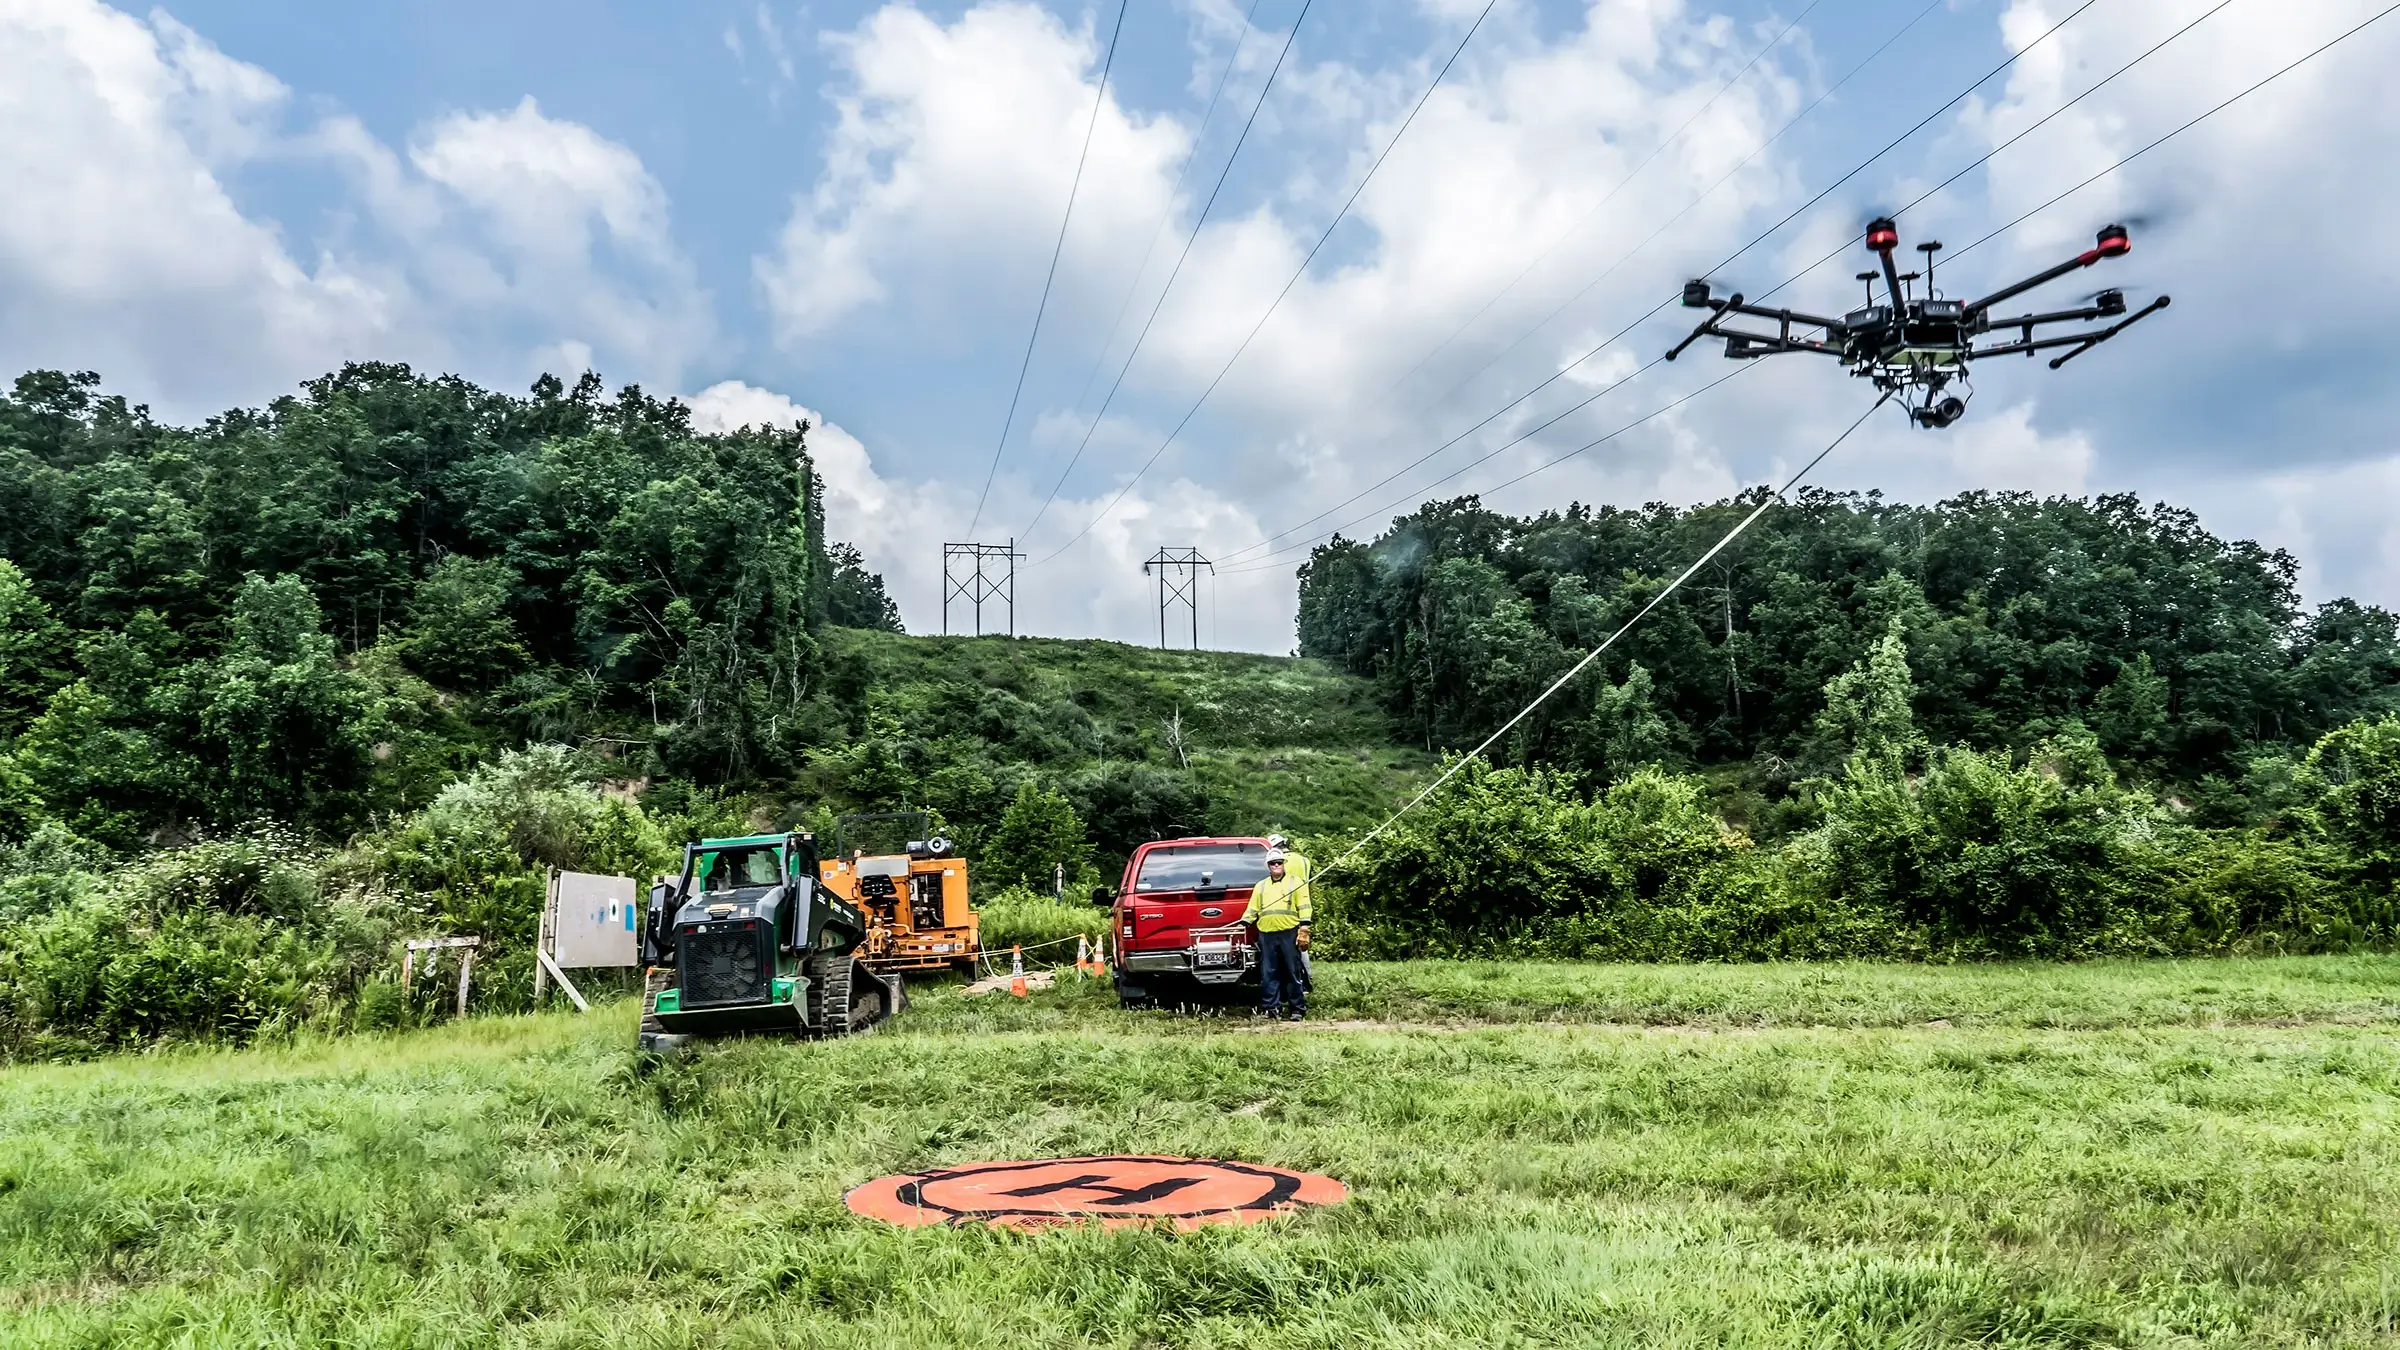 Power crew uses drone to measure area in a grassy field